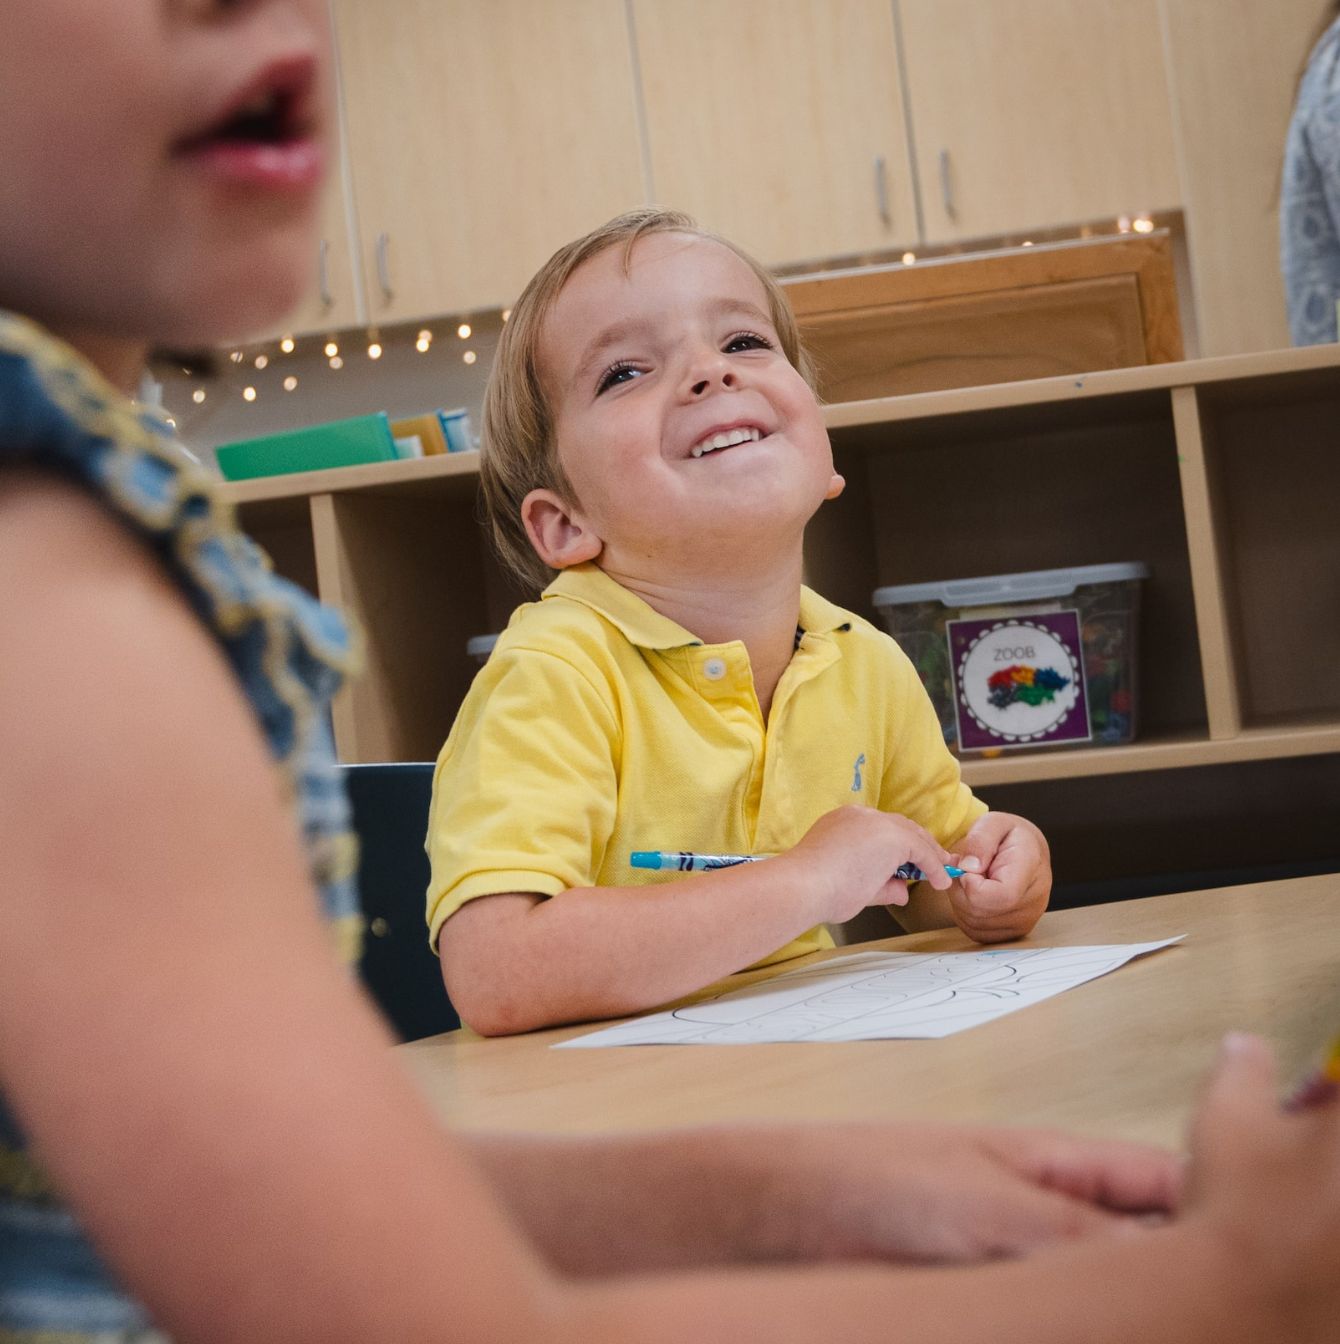 Smiling young boy in a yellow shirt enjoying coloring with crayons at a classroom table, with other children and classroom supplies in the background.